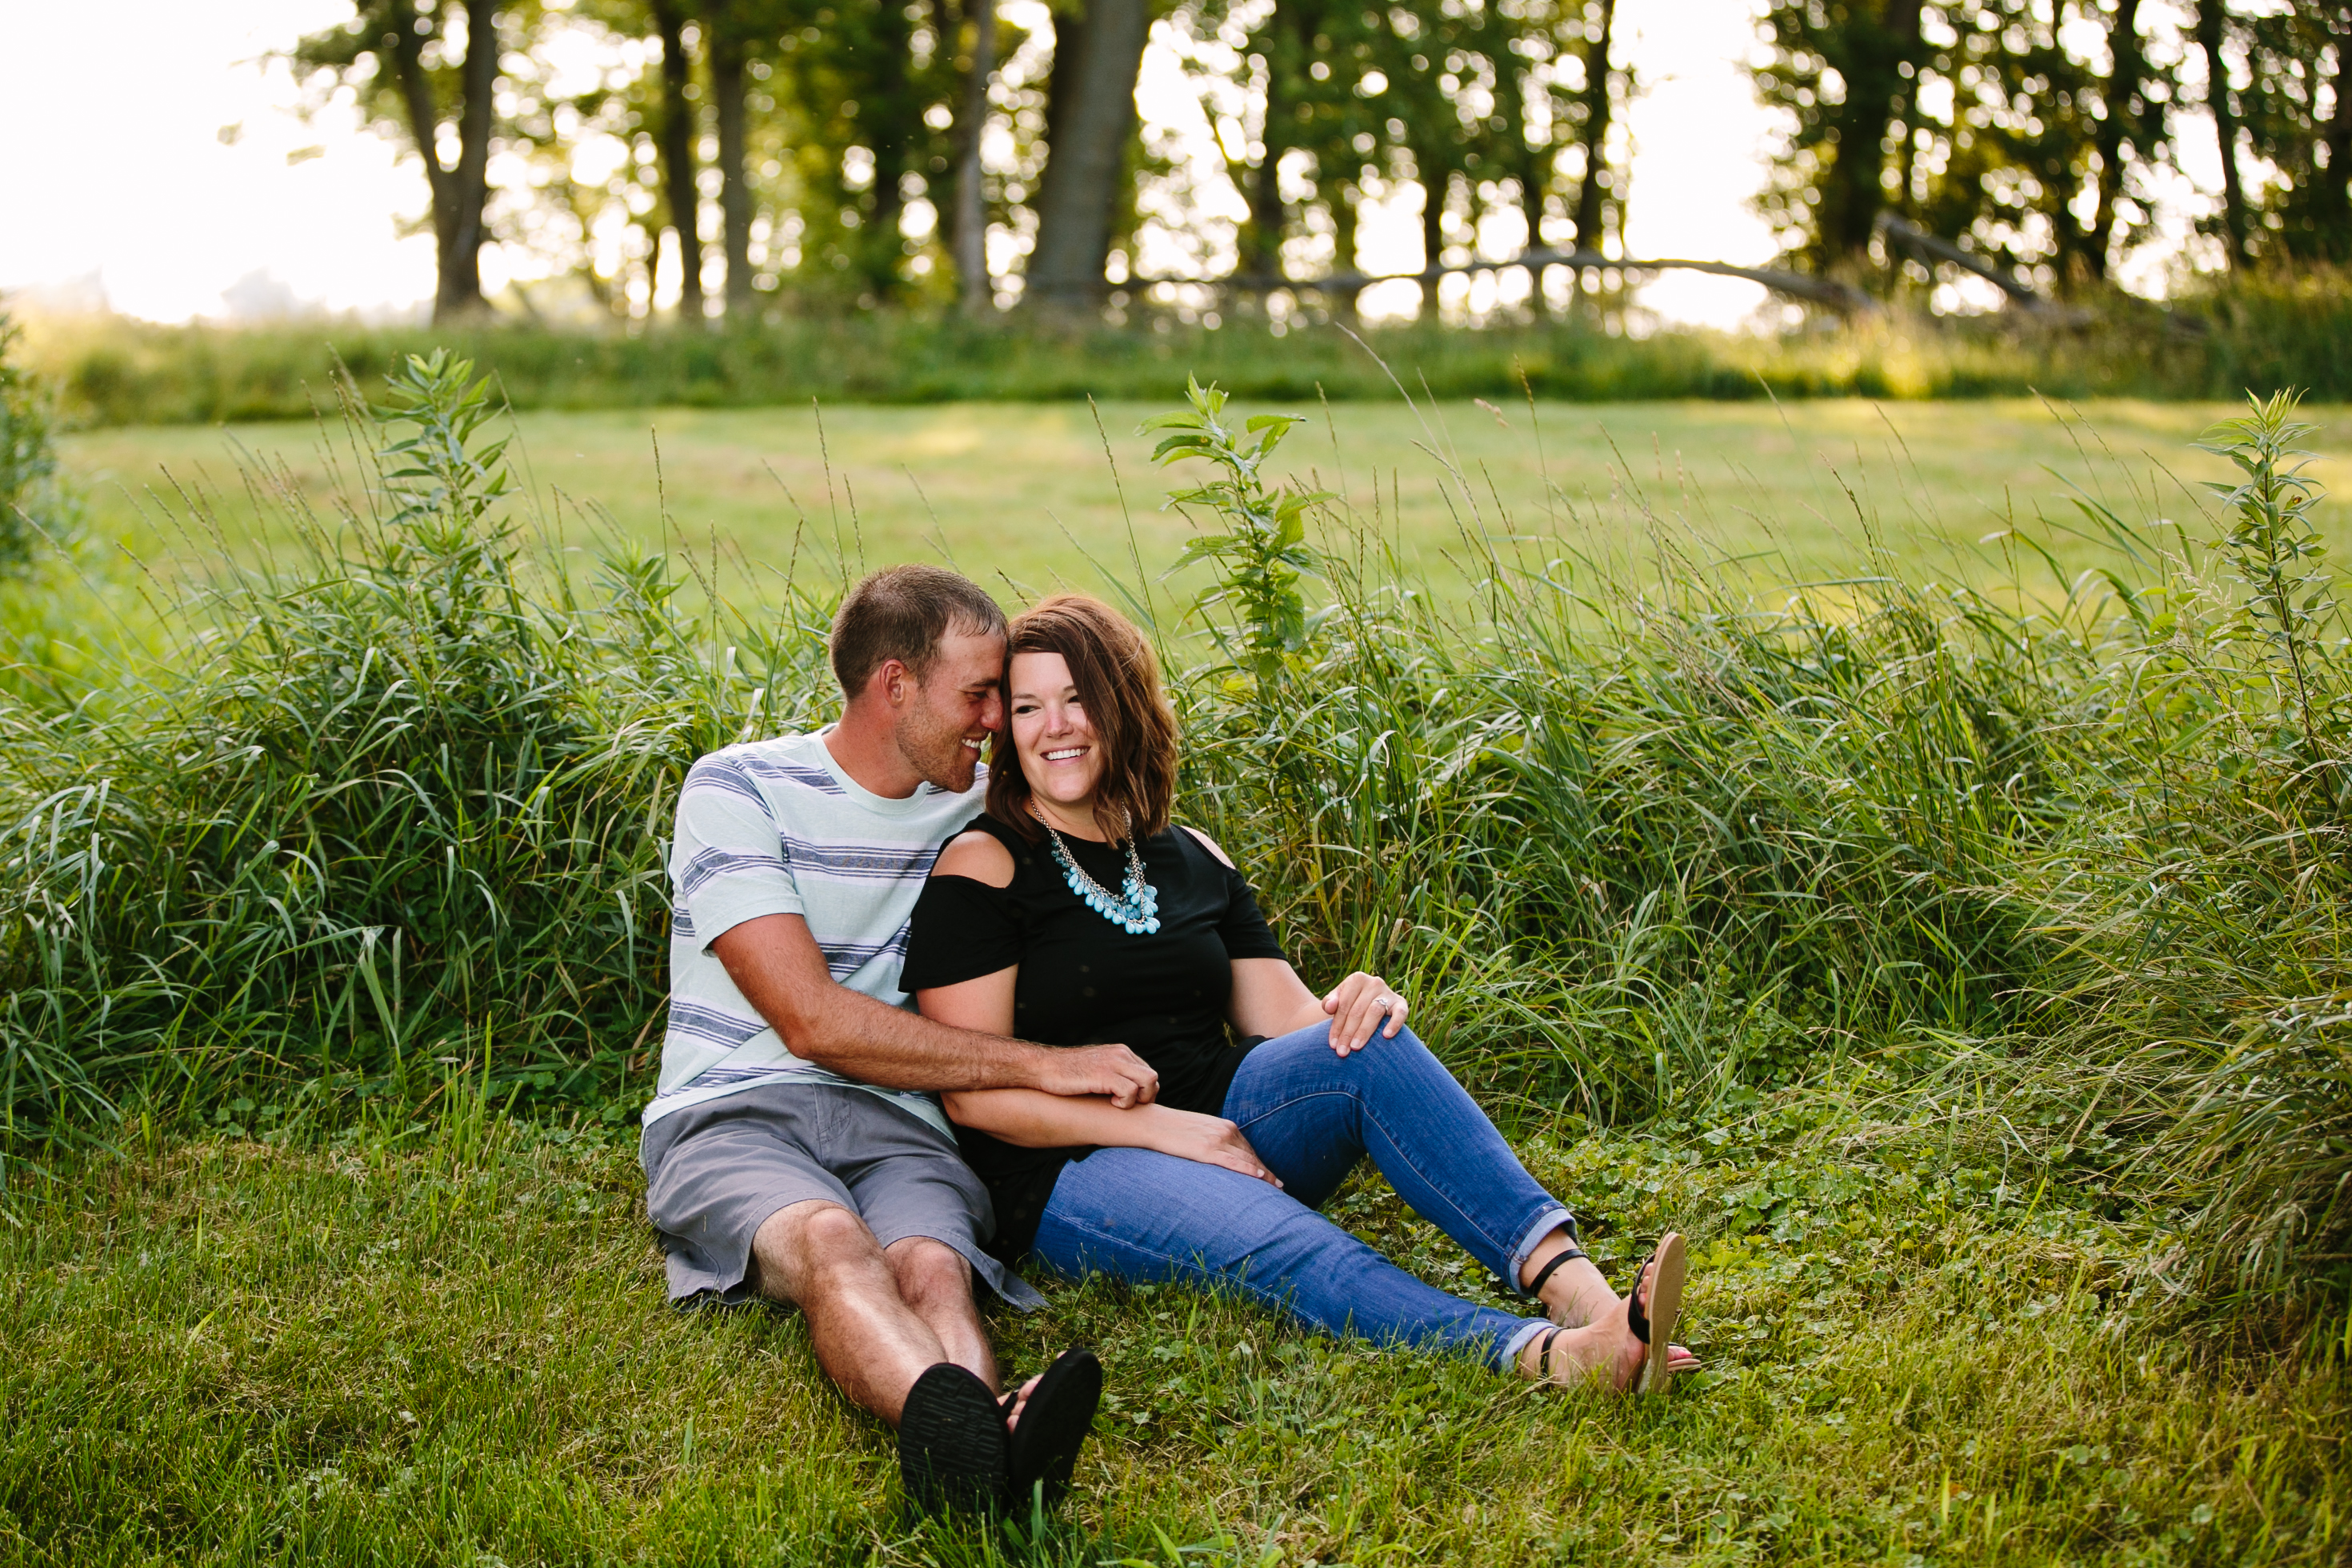 outdoor dubuque engagement session by catherine furlin photography, couple sitting in the grass